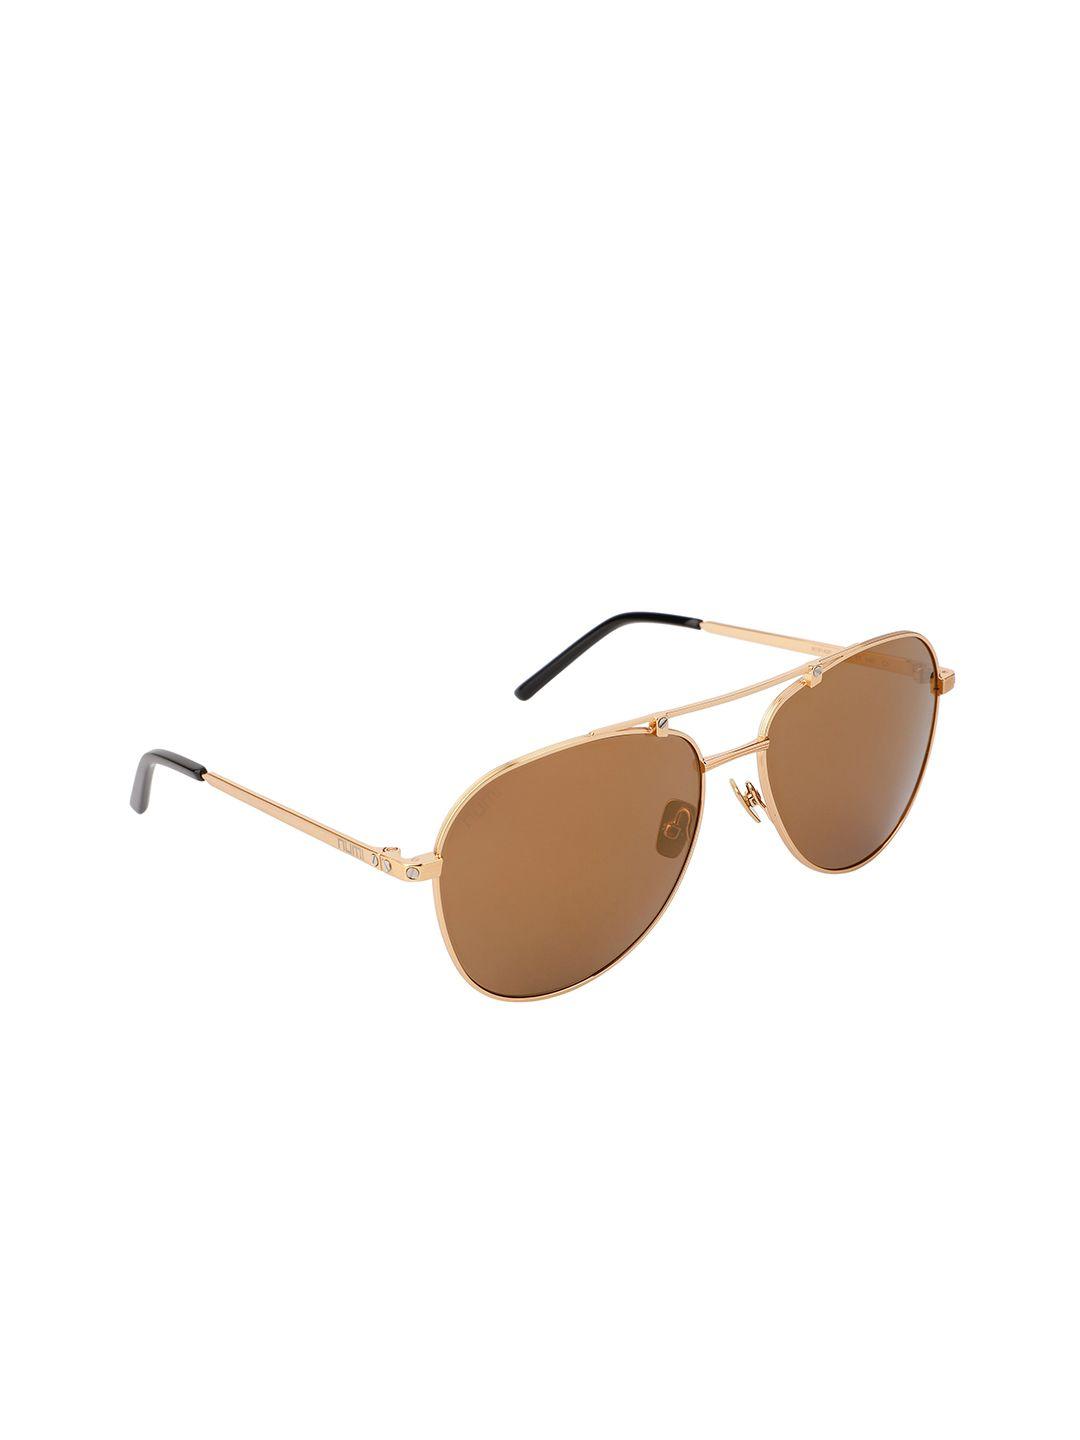 numi men brown lens & gold-toned aviator sunglasses with uv protected lens